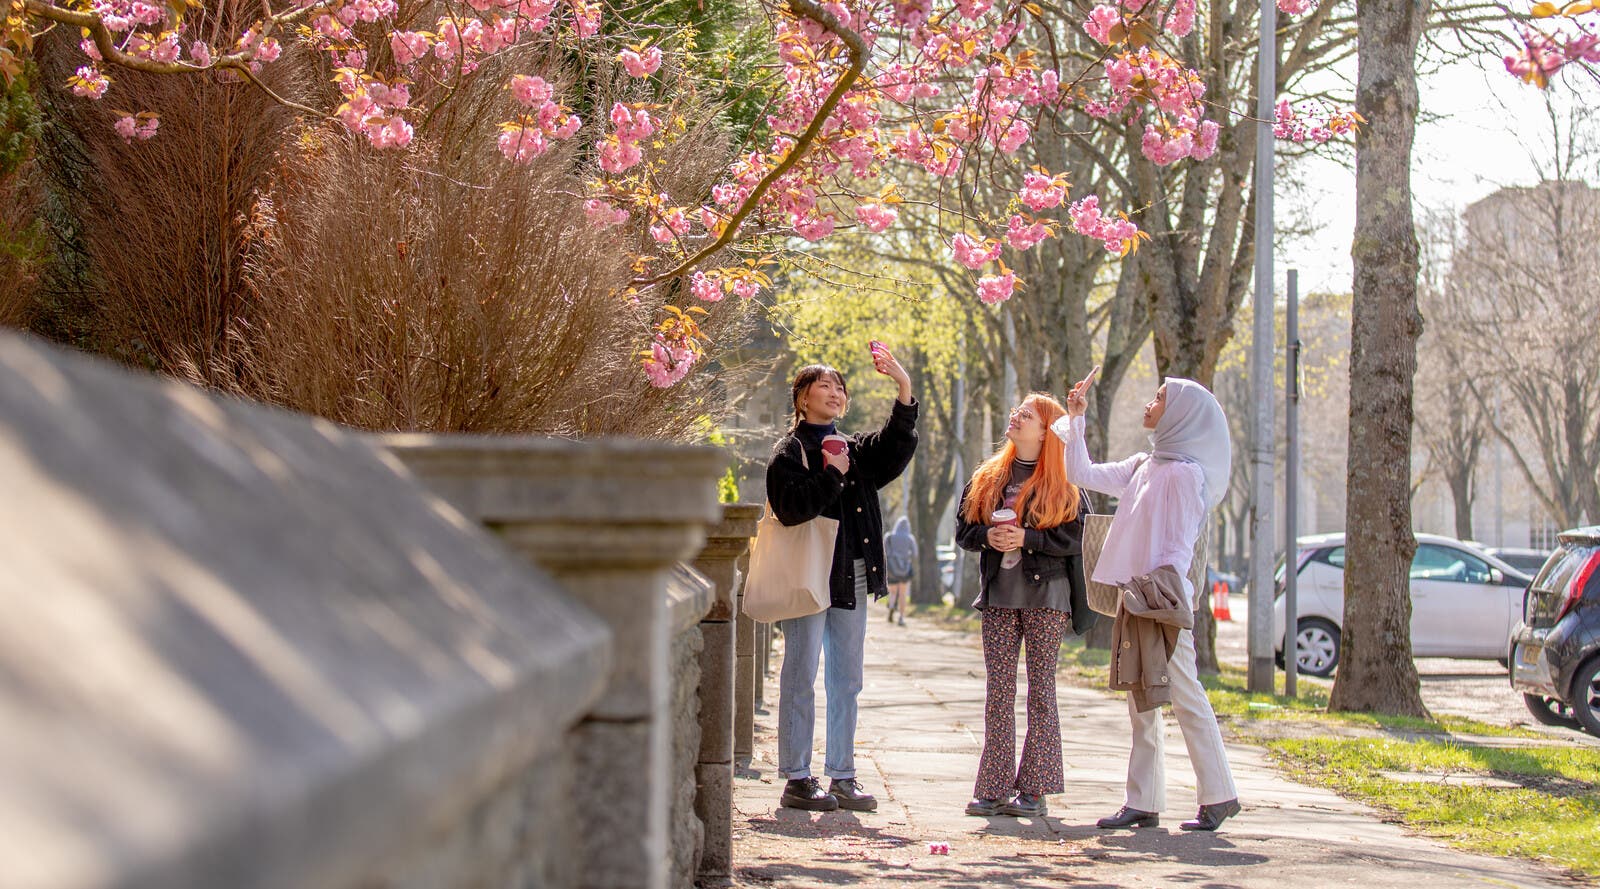 Three students under blossoming trees on a university campus